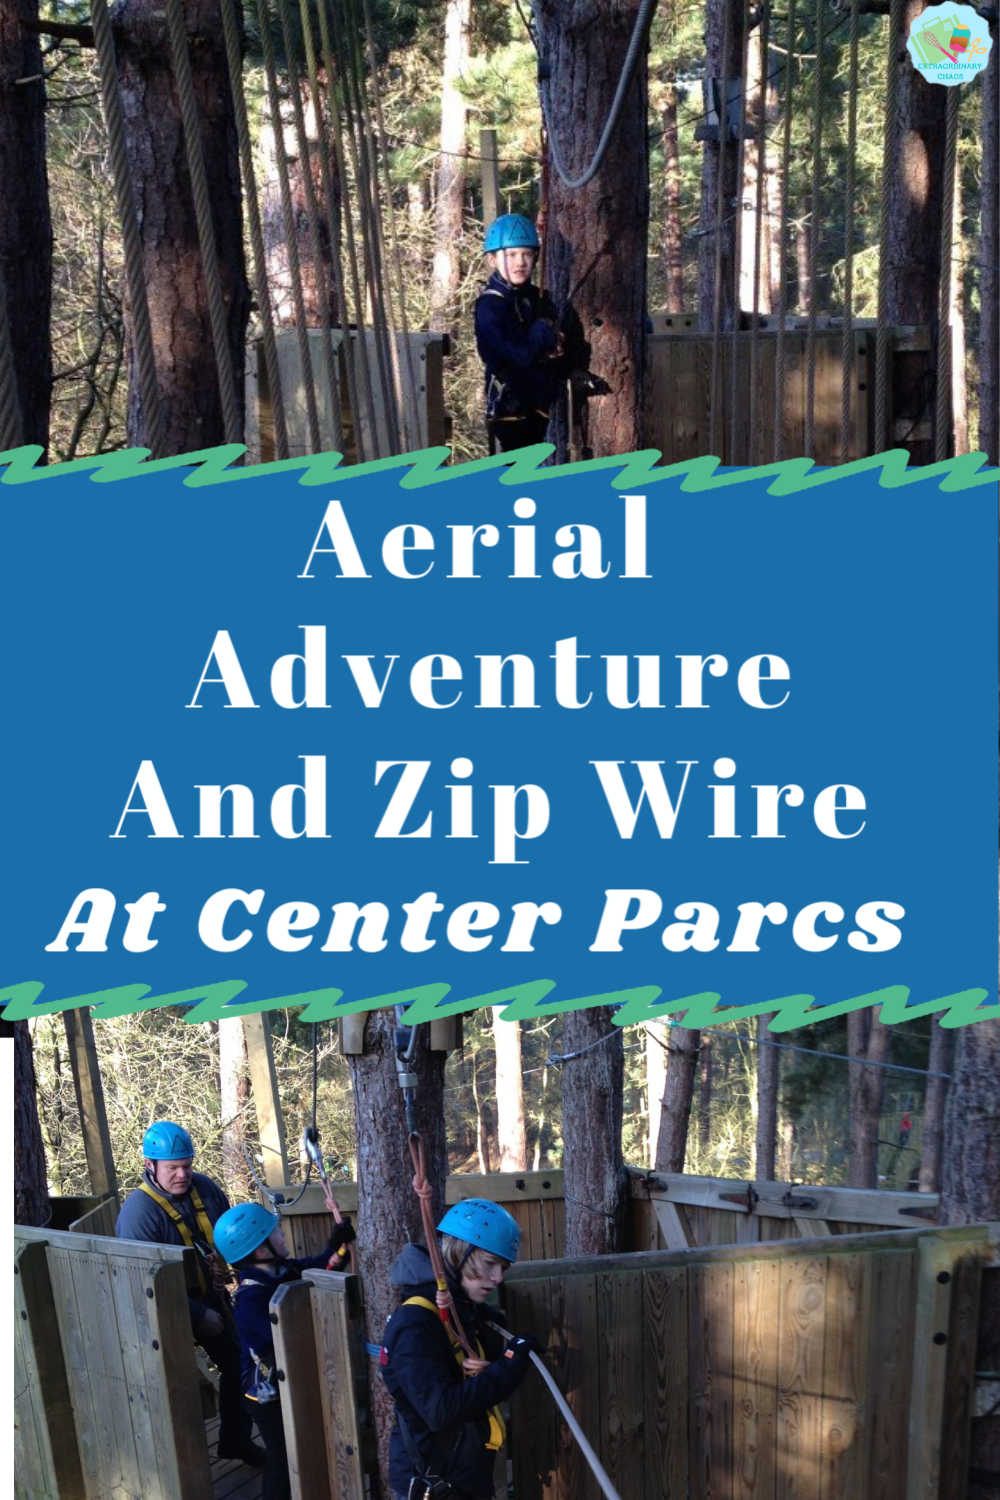 Guide To The Aerial Adventure And Zip Wire At Center Parcs